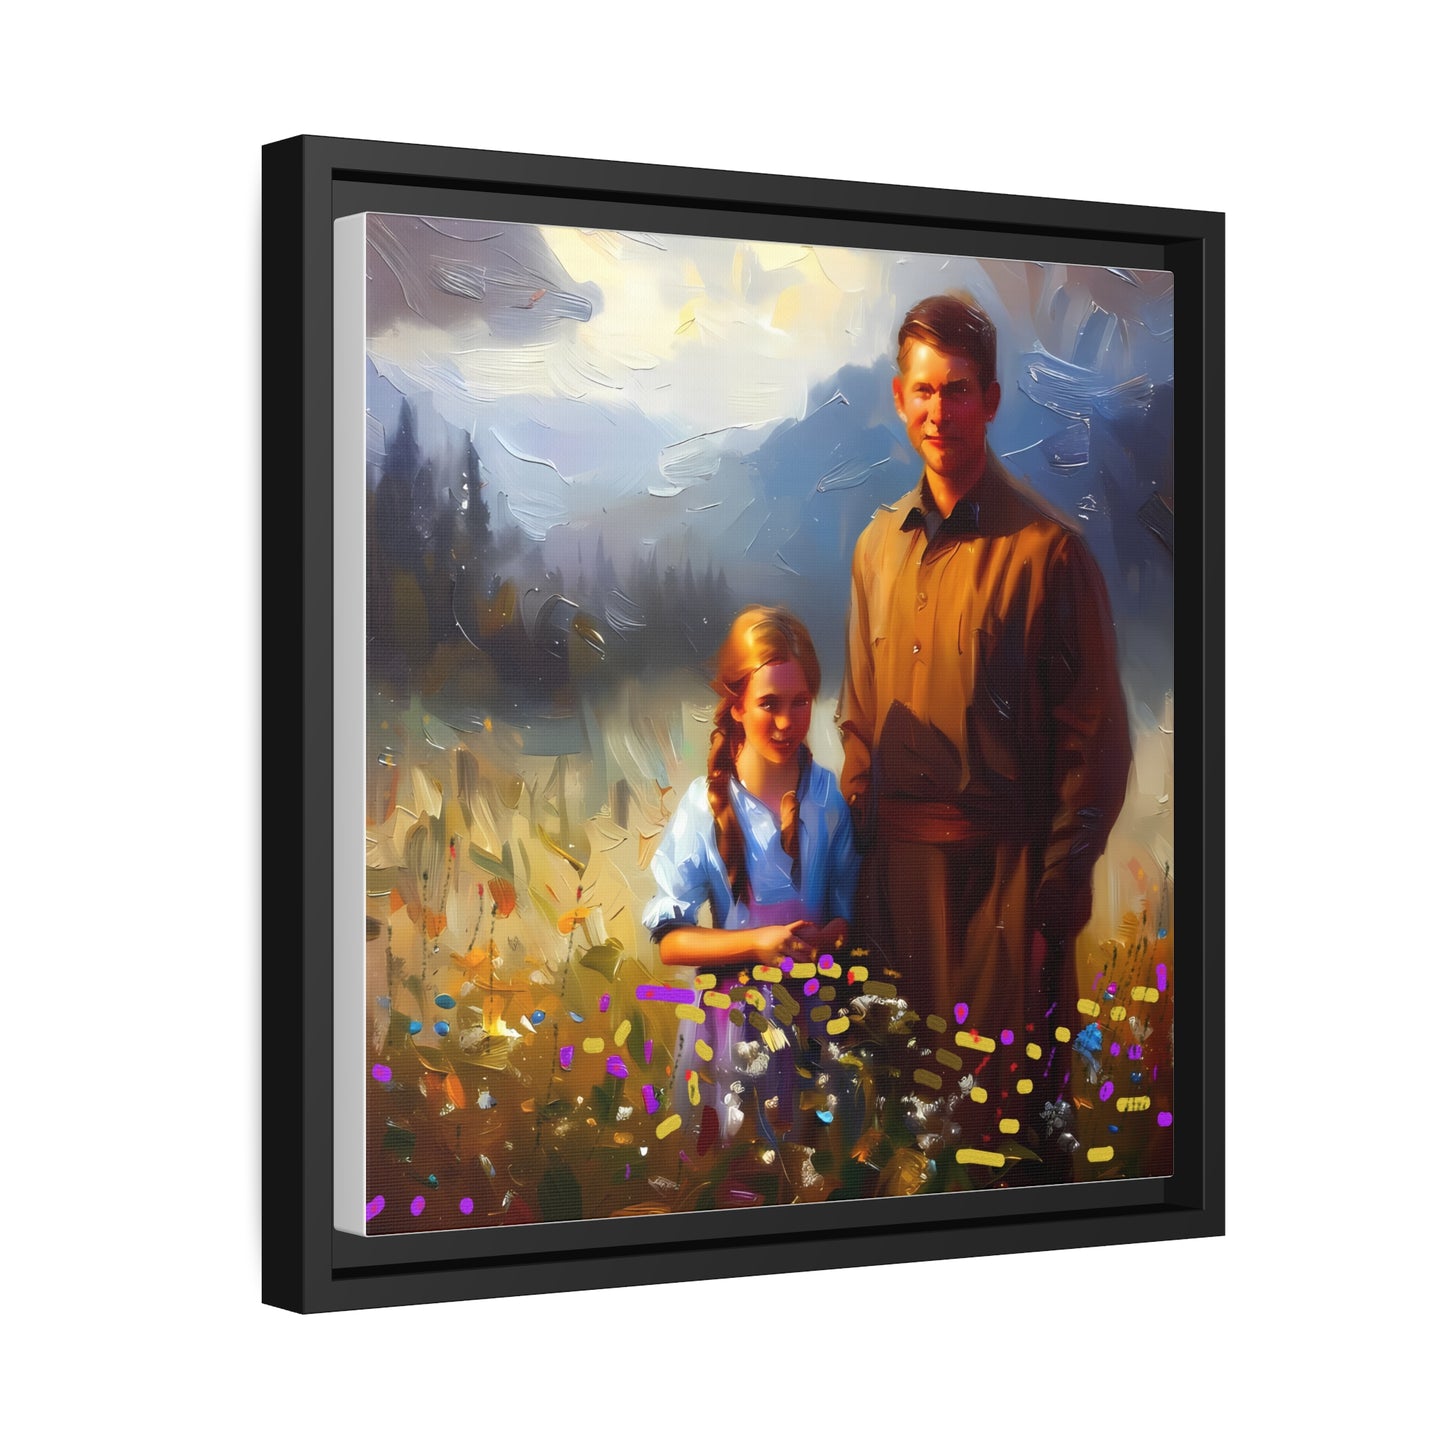 Awesome Matte Wall Art Canvas Decor Black Frame - Framed Canvas Art Fathers Day Gift Item